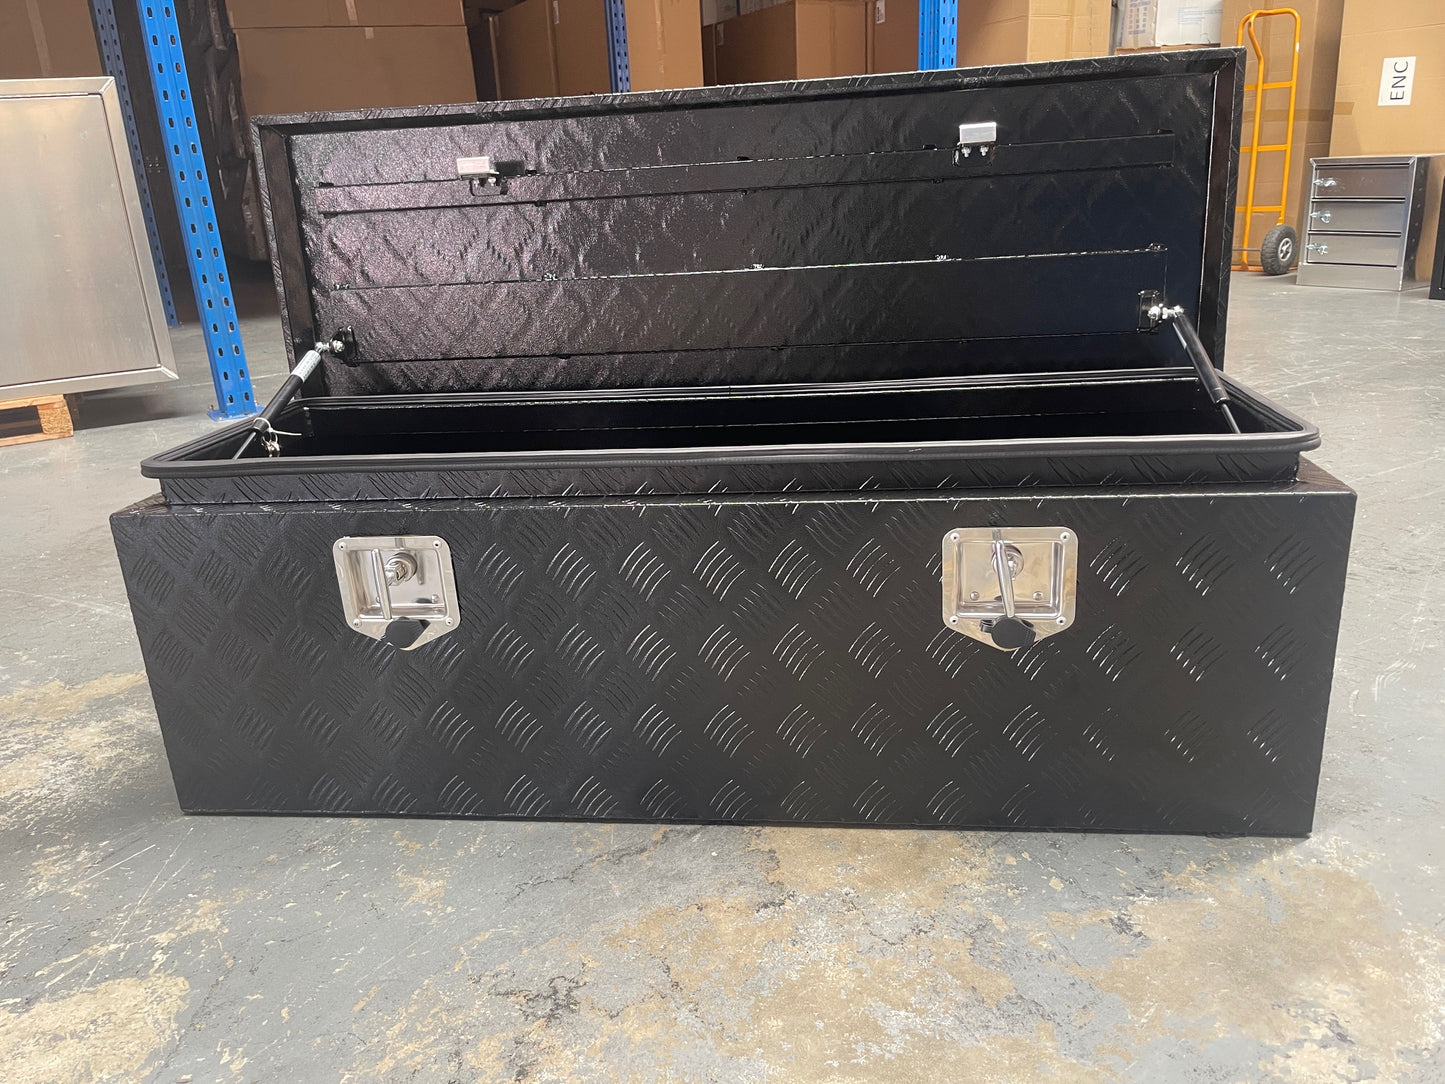 Black Top Opening Box with Handles - 1200mm Long x 400mm Wide x 400mm High